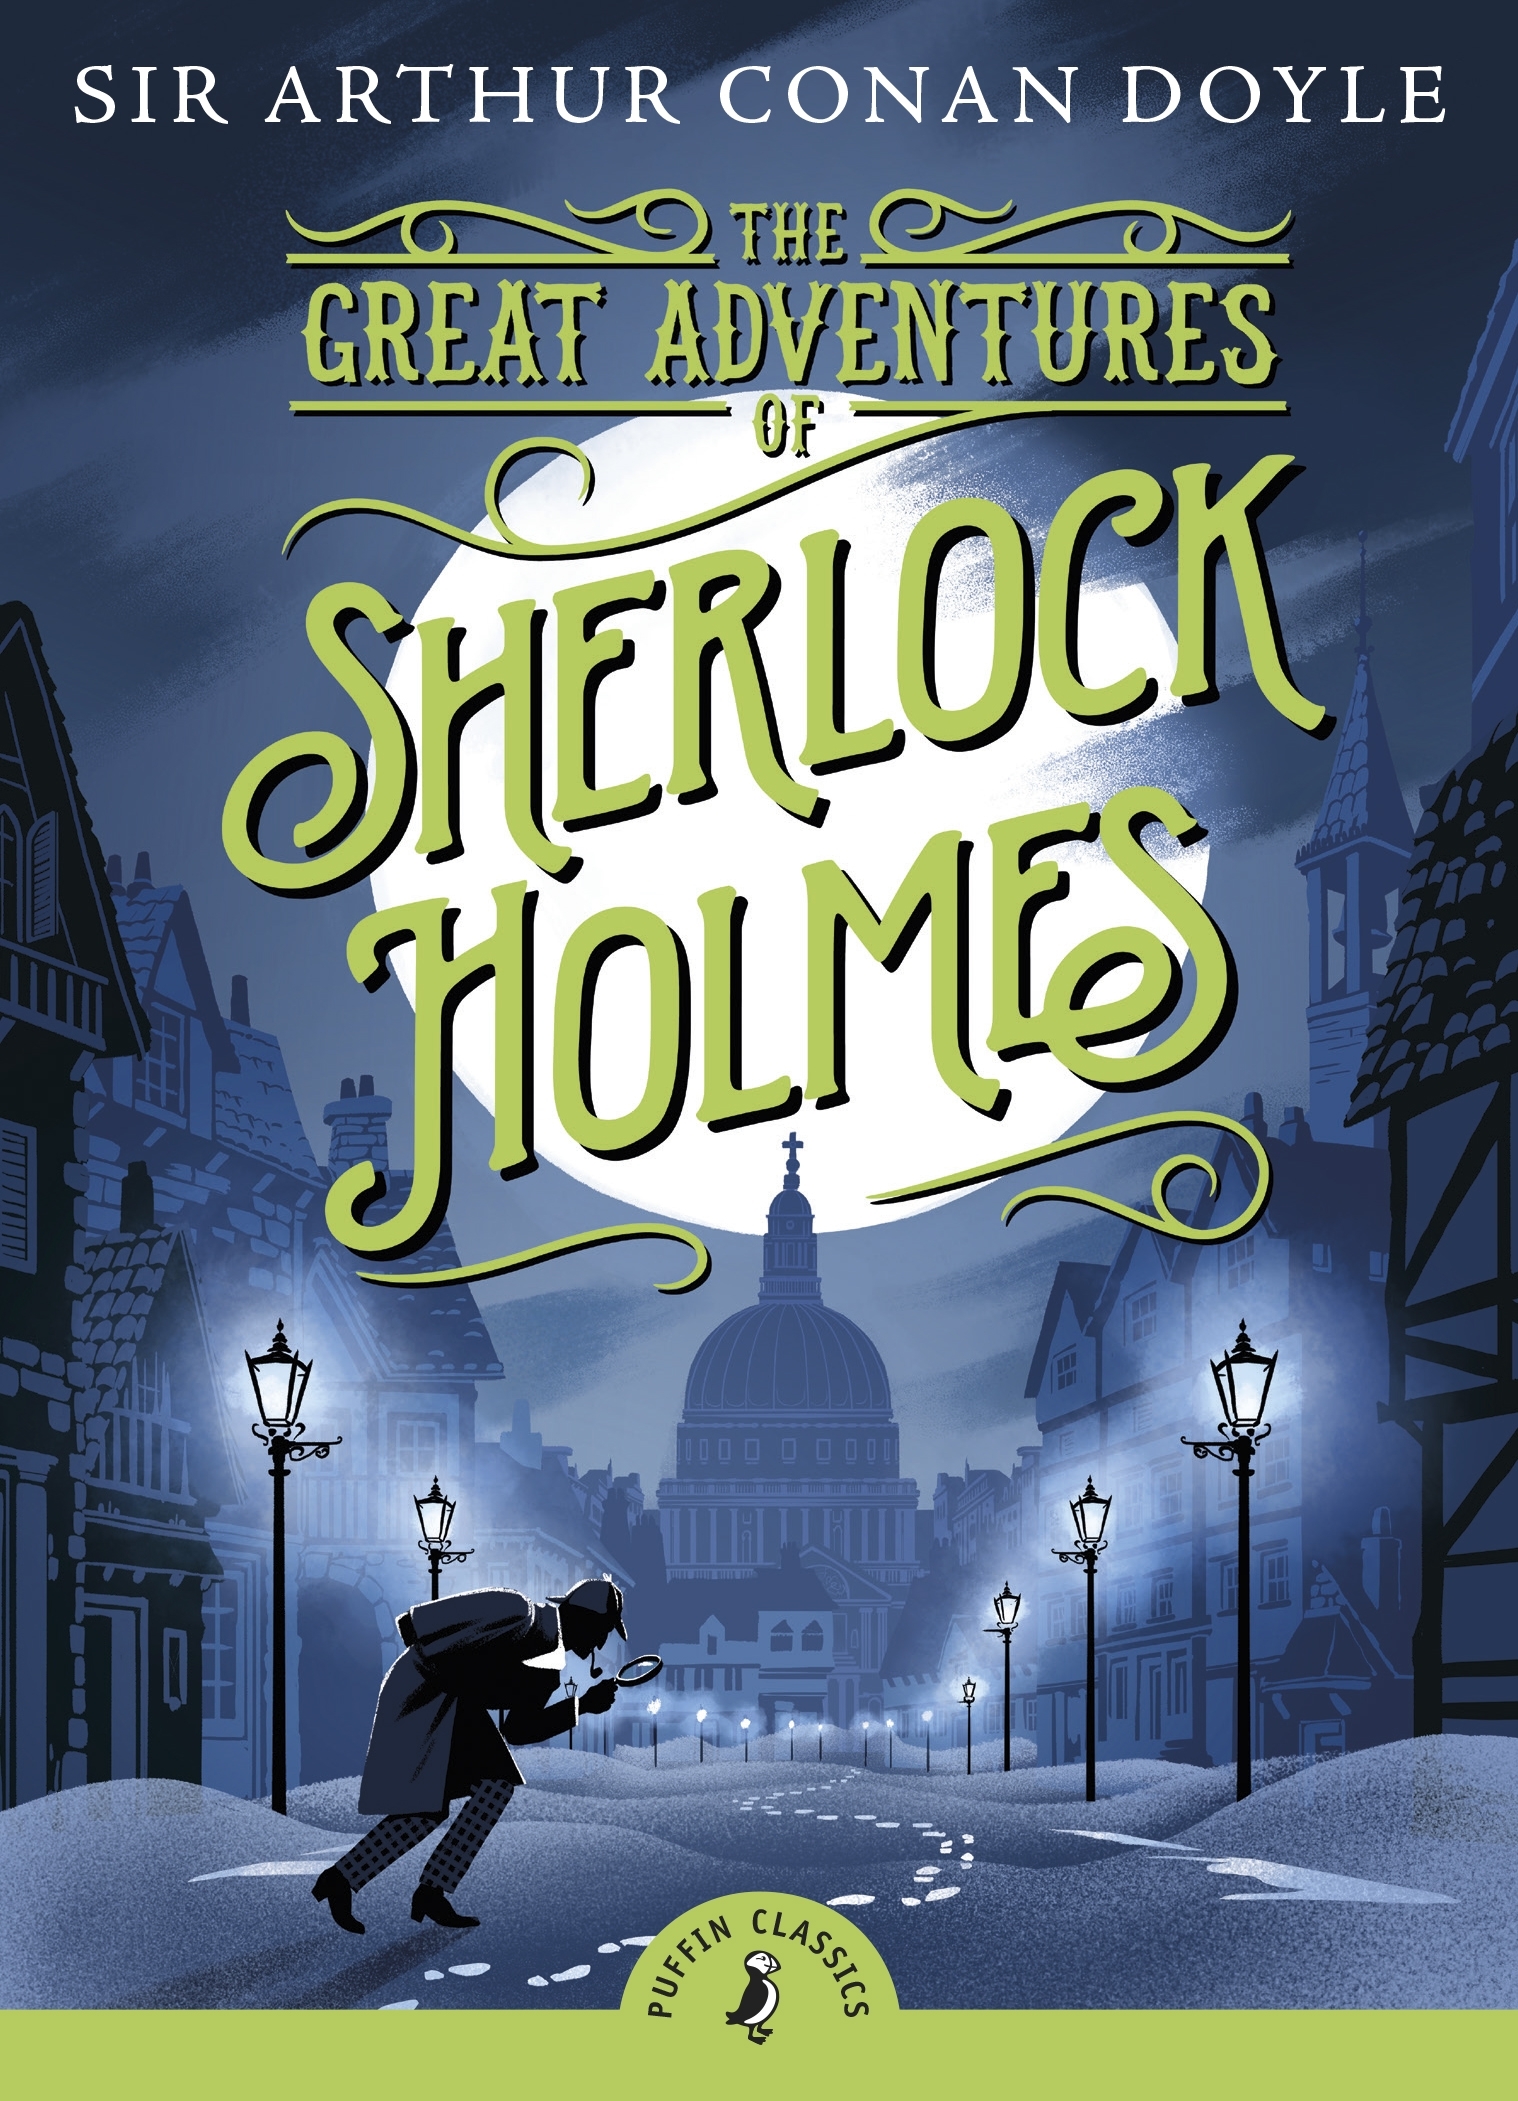 review of a novel by sherlock holmes